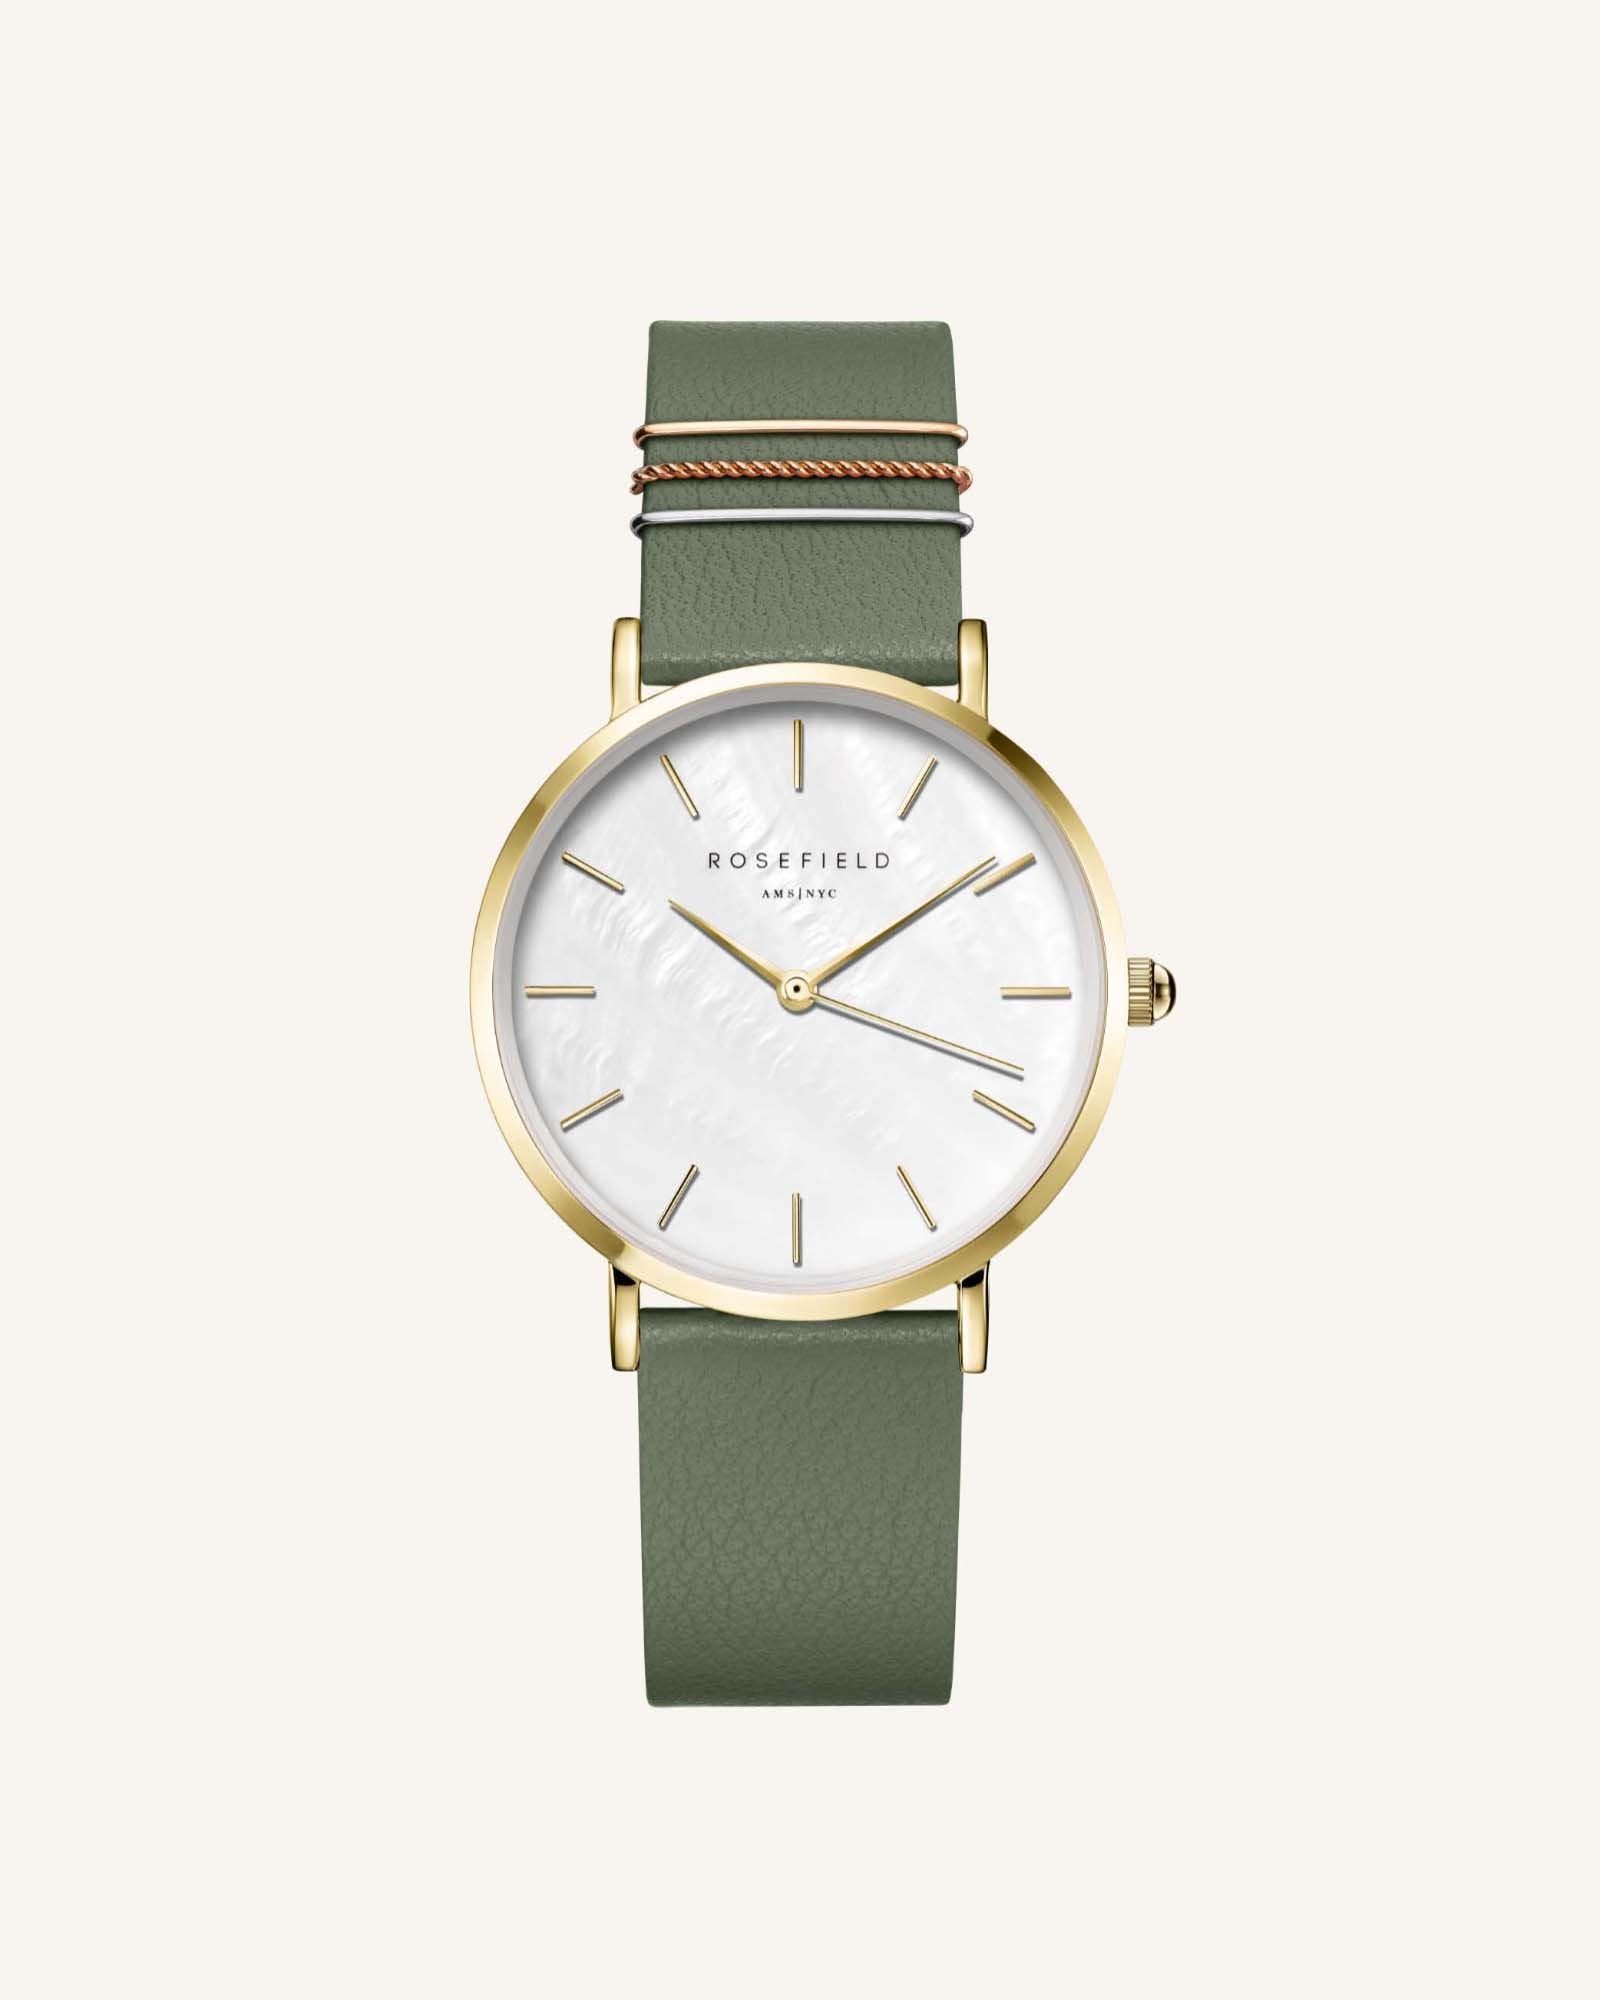 West Village Olive Green | Rosefield Official